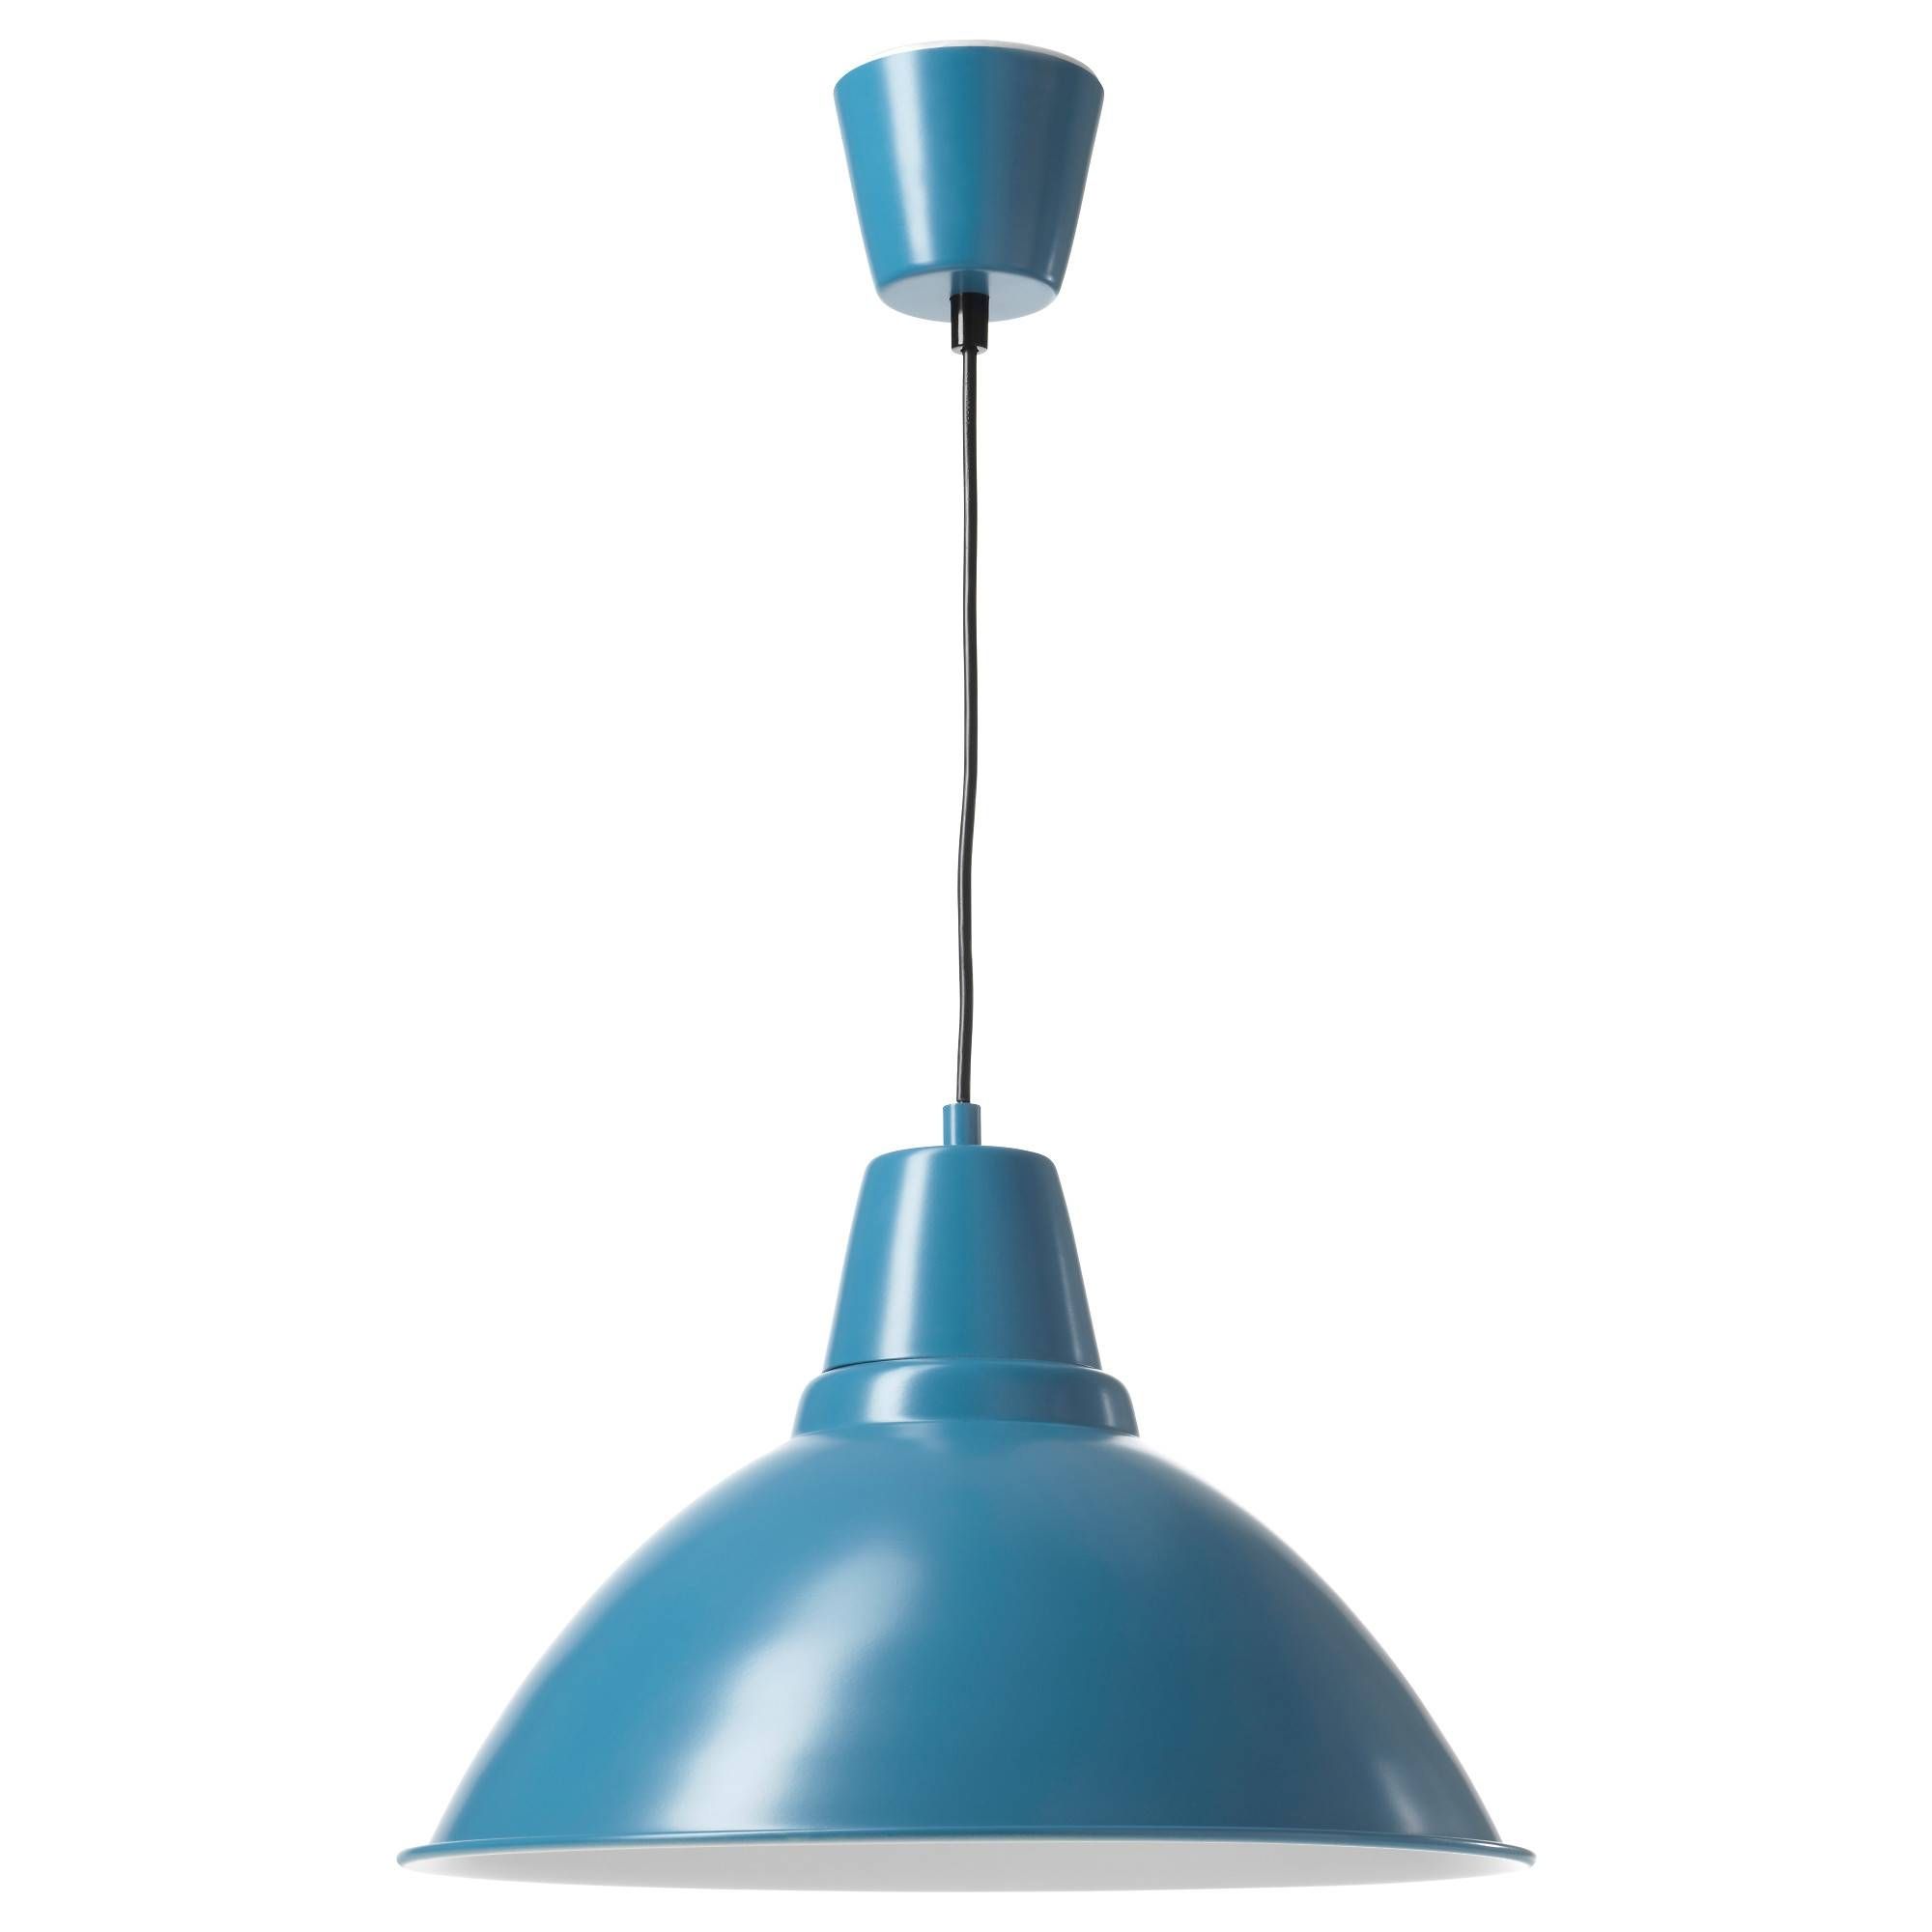 Foto Pendant Lamp Blue 38 Cm – Ikea Intended For Blue Pendant Lights Fixtures (View 11 of 15)